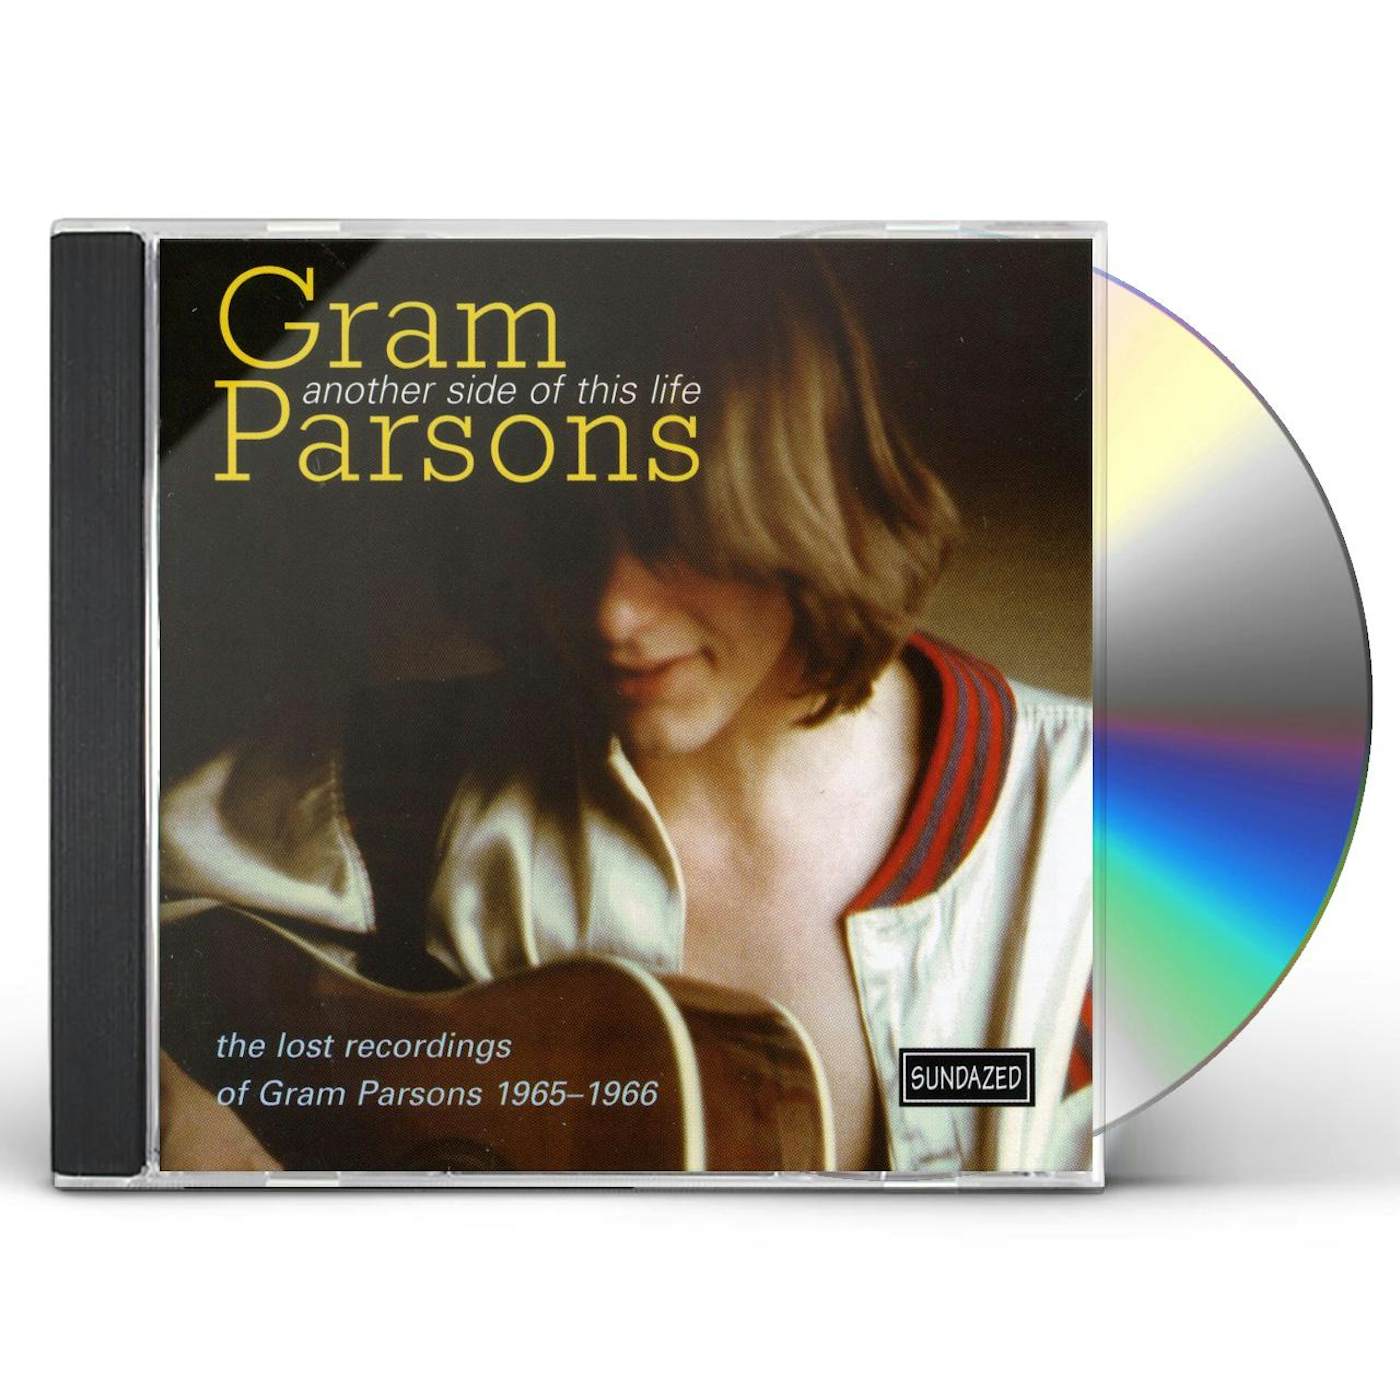 Gram Parsons ANOTHER SIDE OF THIS LIFE CD